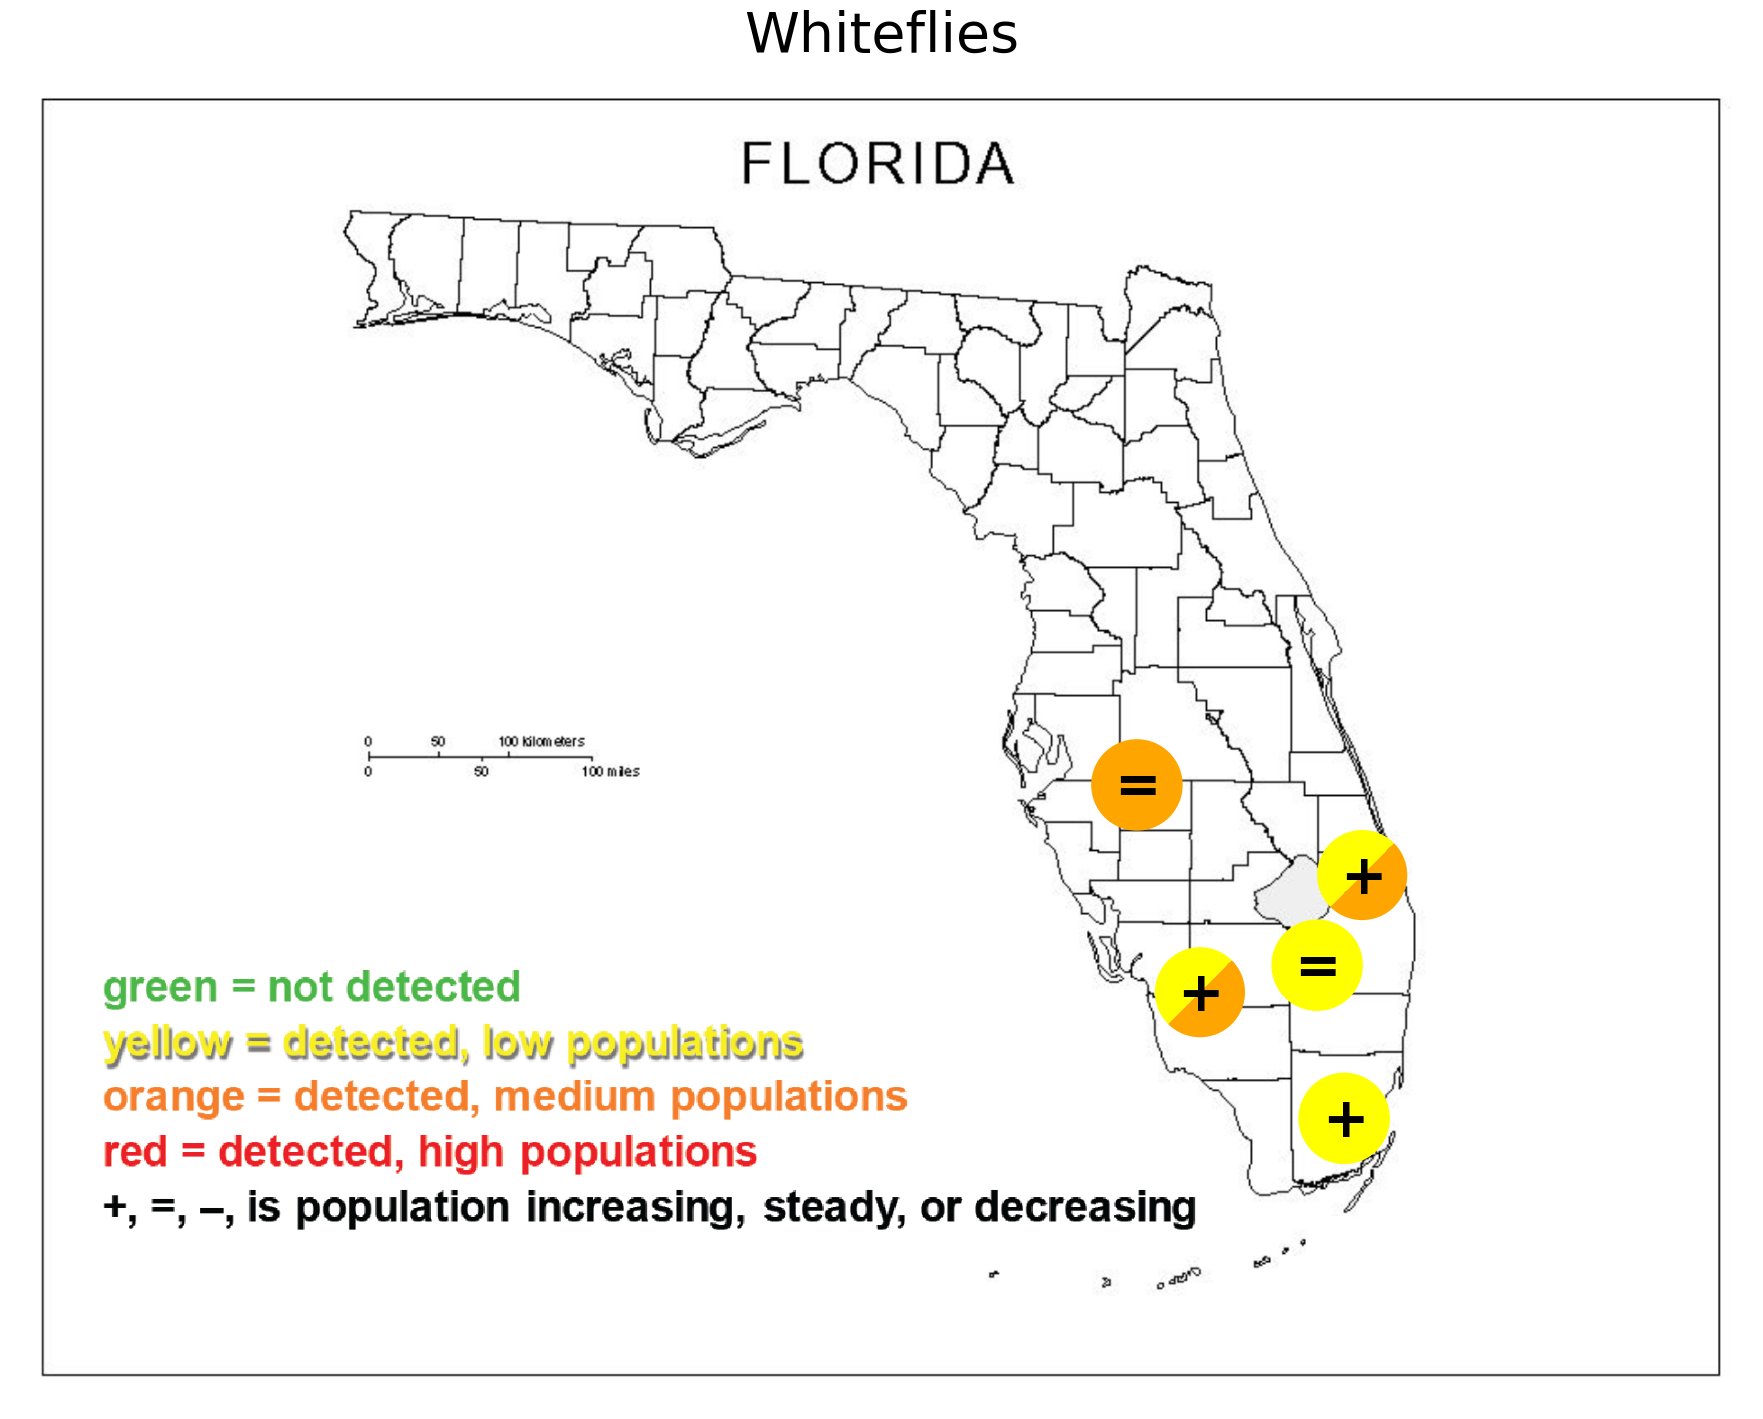 Featured image for “Whitefly Population Update Across South Florida”